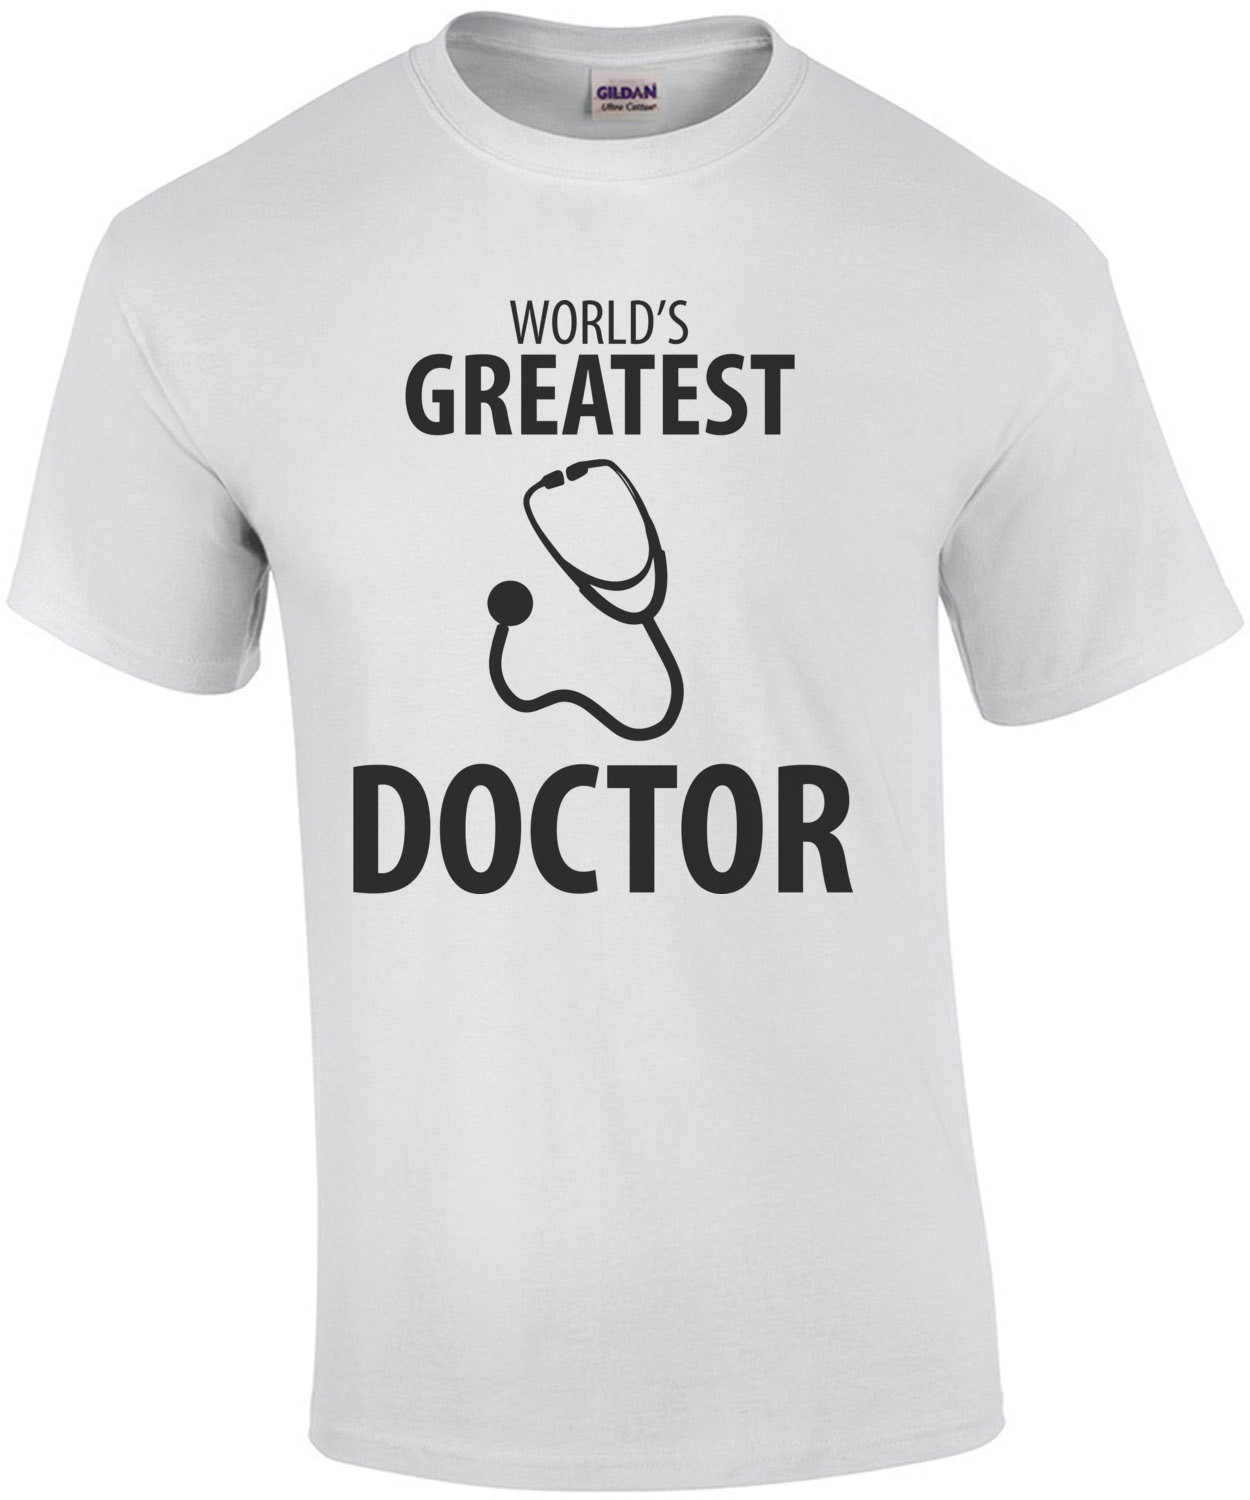 World's Greatest Doctor - Doctor T-Shirt